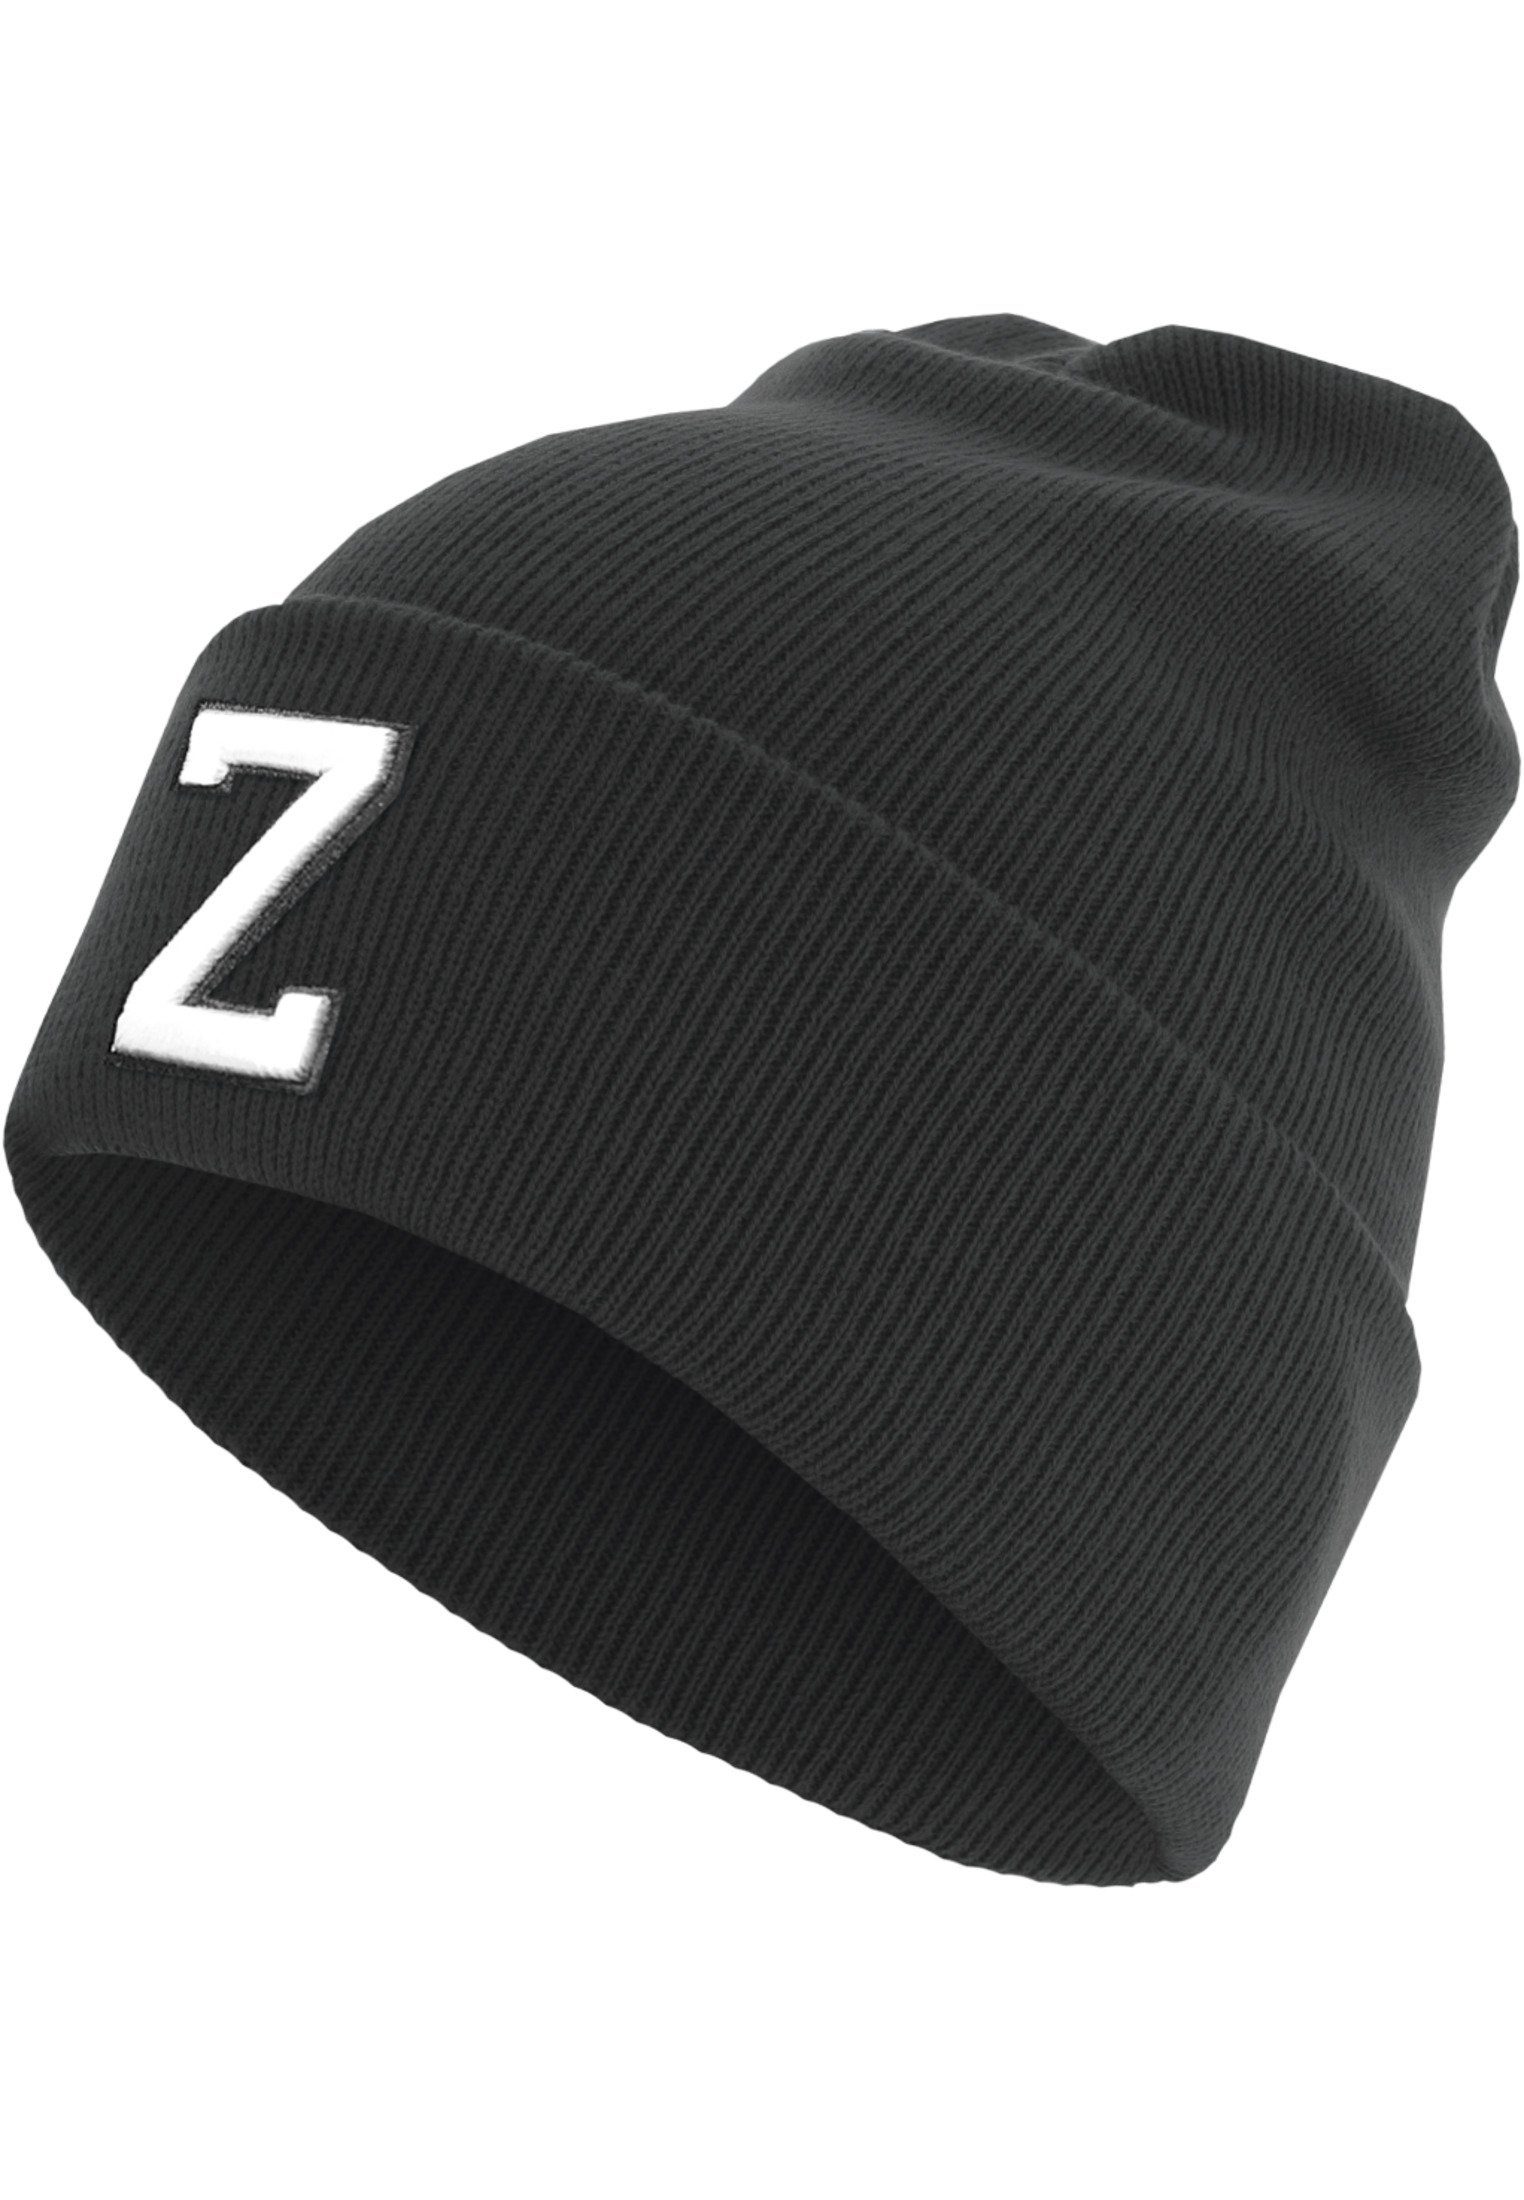 MSTRDS Beanie Accessoires Letter (1-St) Cuff Z Beanie Knit